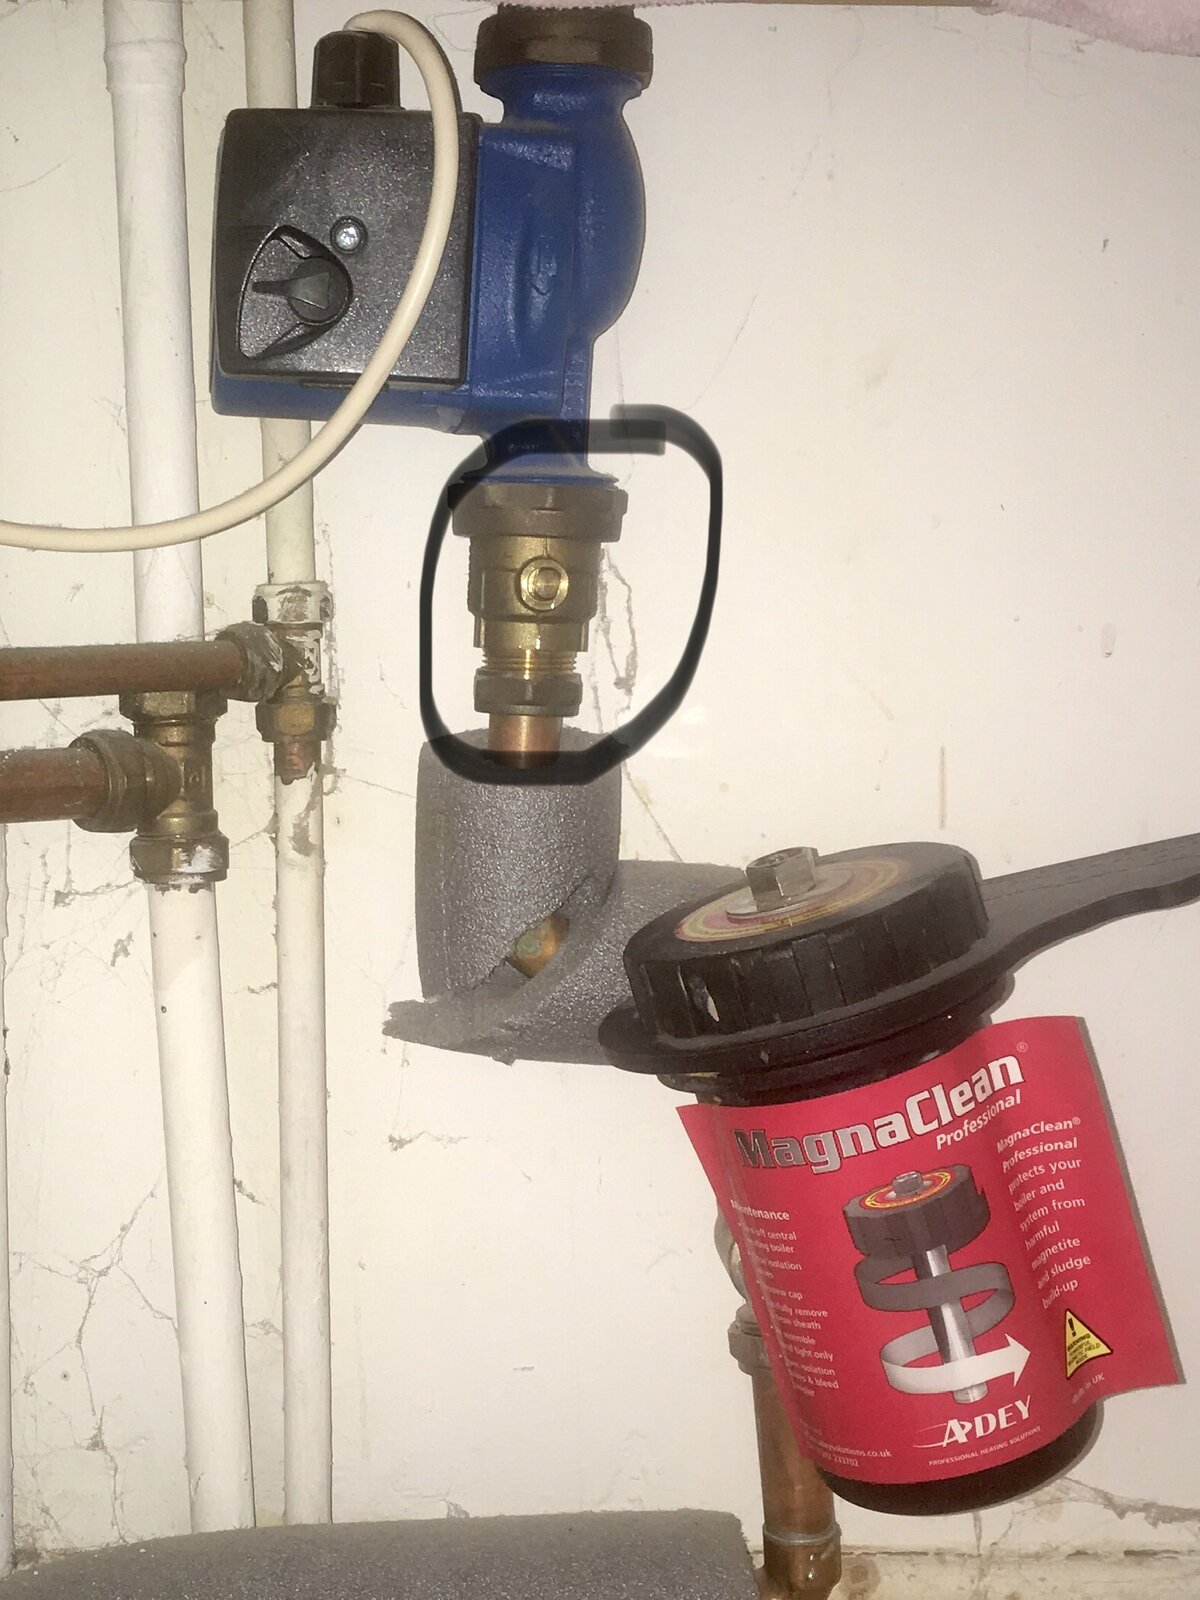 Boiler keeps cutting out after leak & no hot water | Page 2 | DIYnot Forums Water Tank Pump Keeps Turning On And Off